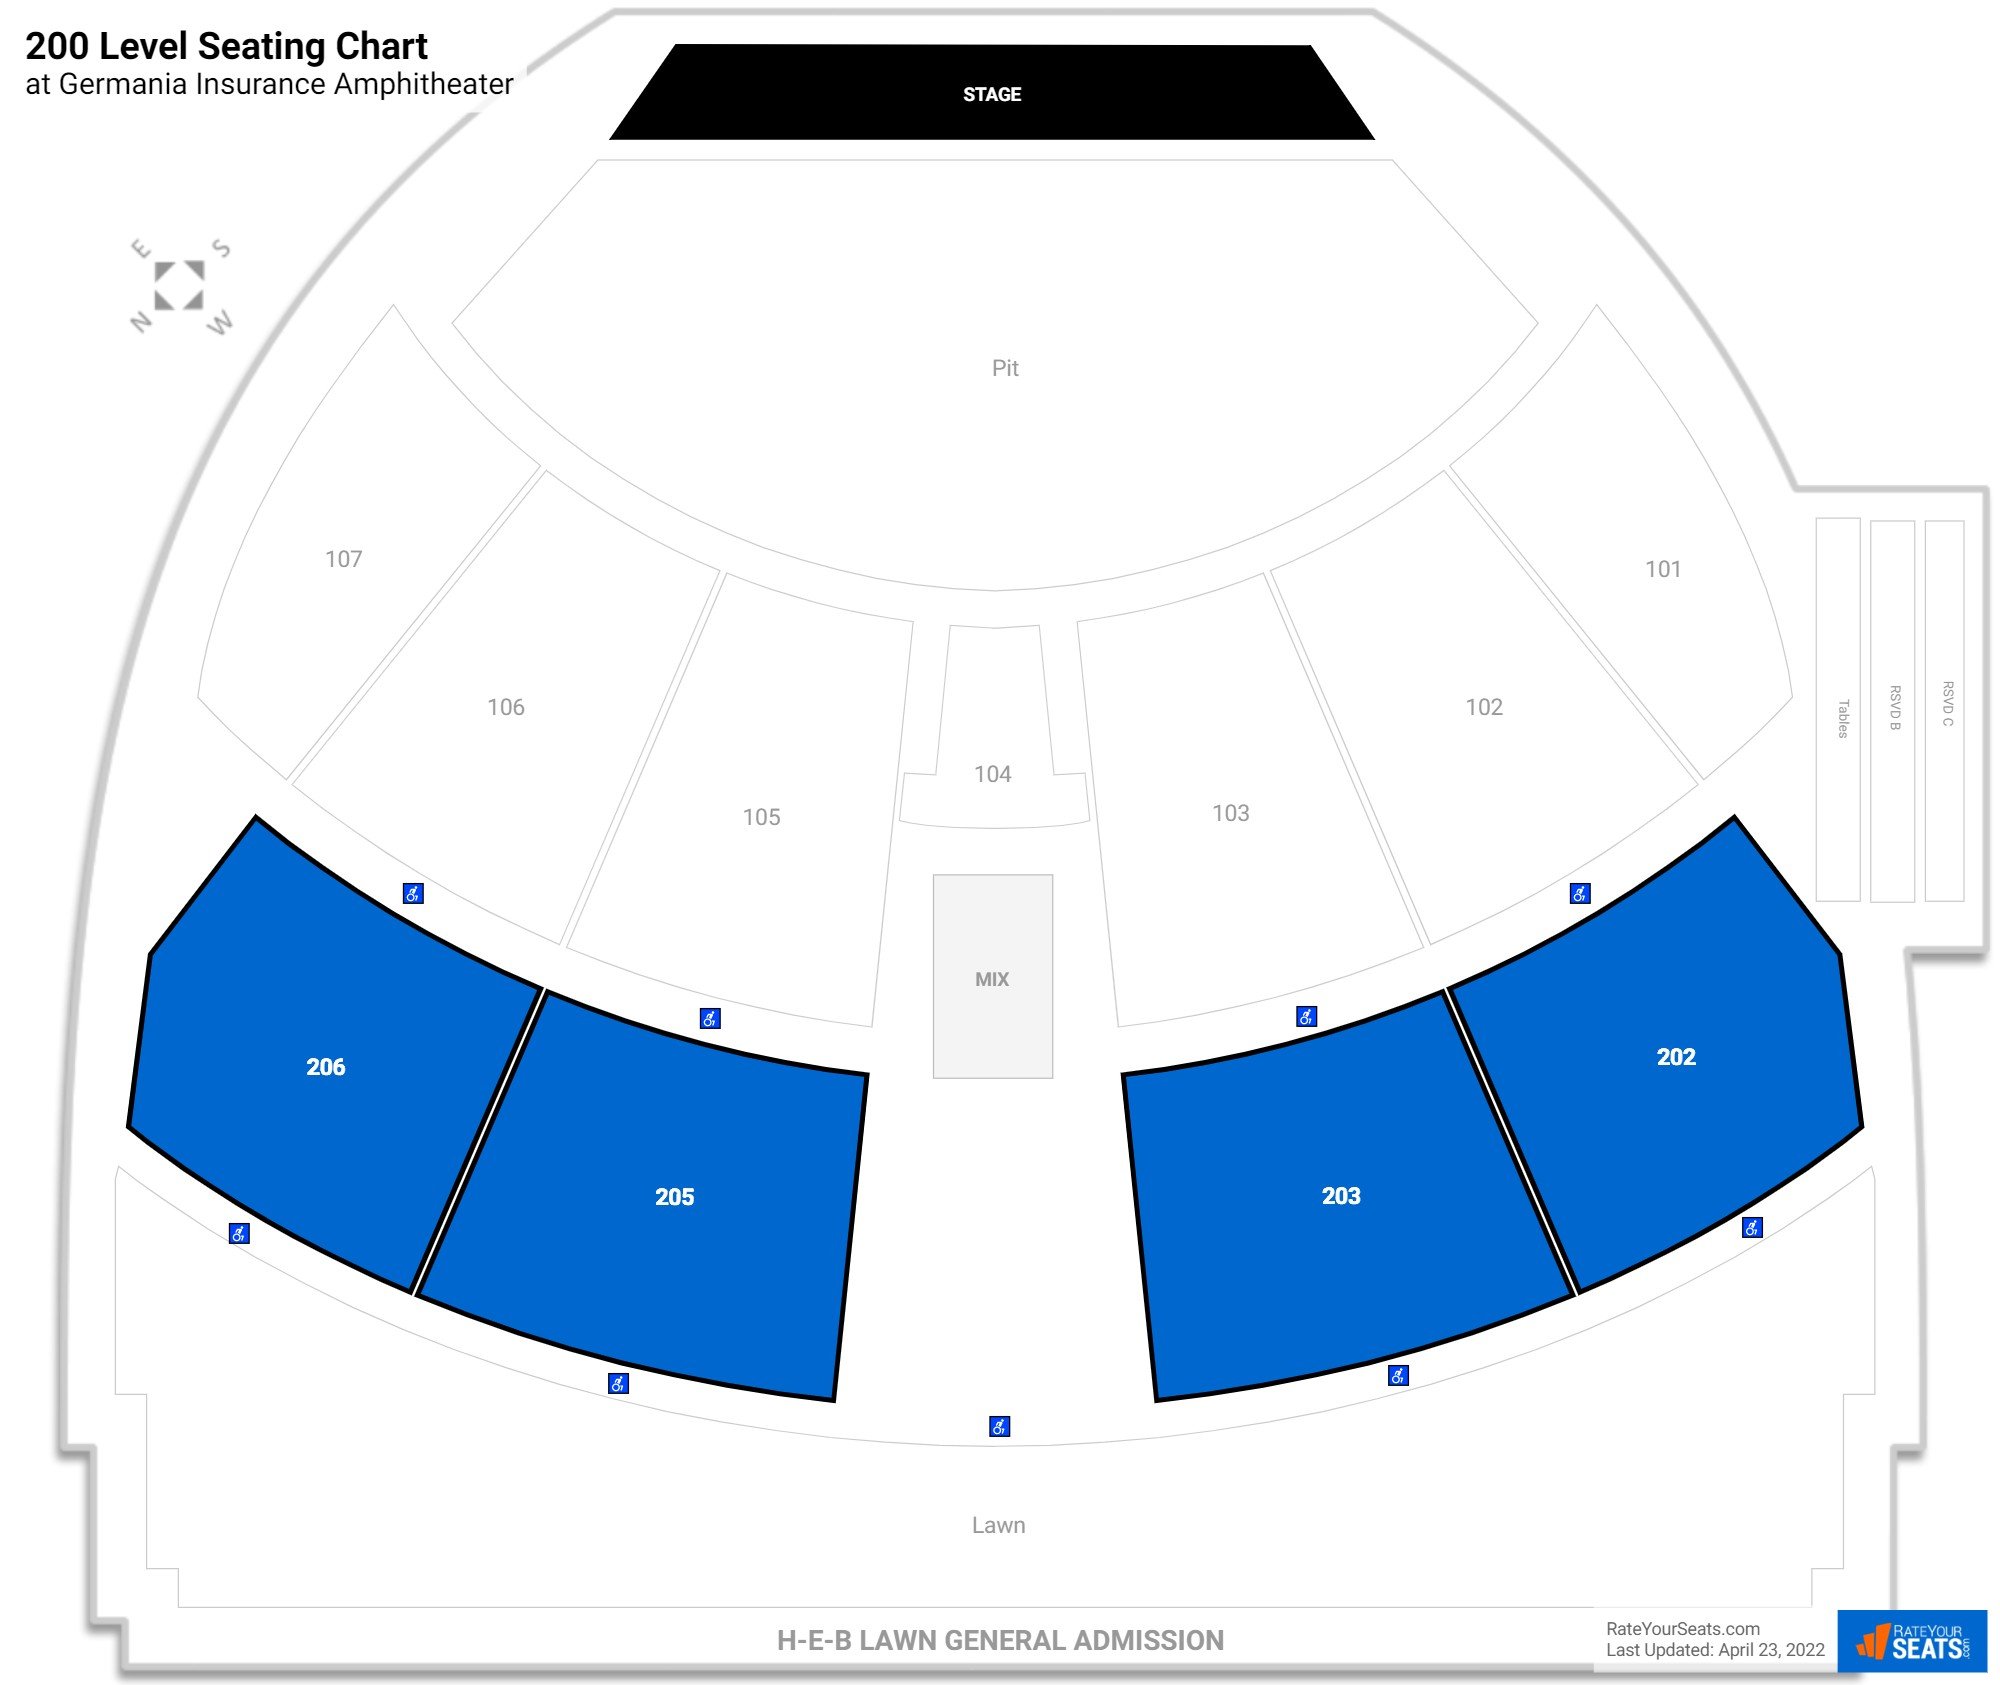 Concert 200 Level Seating Chart at Germania Insurance Amphitheater